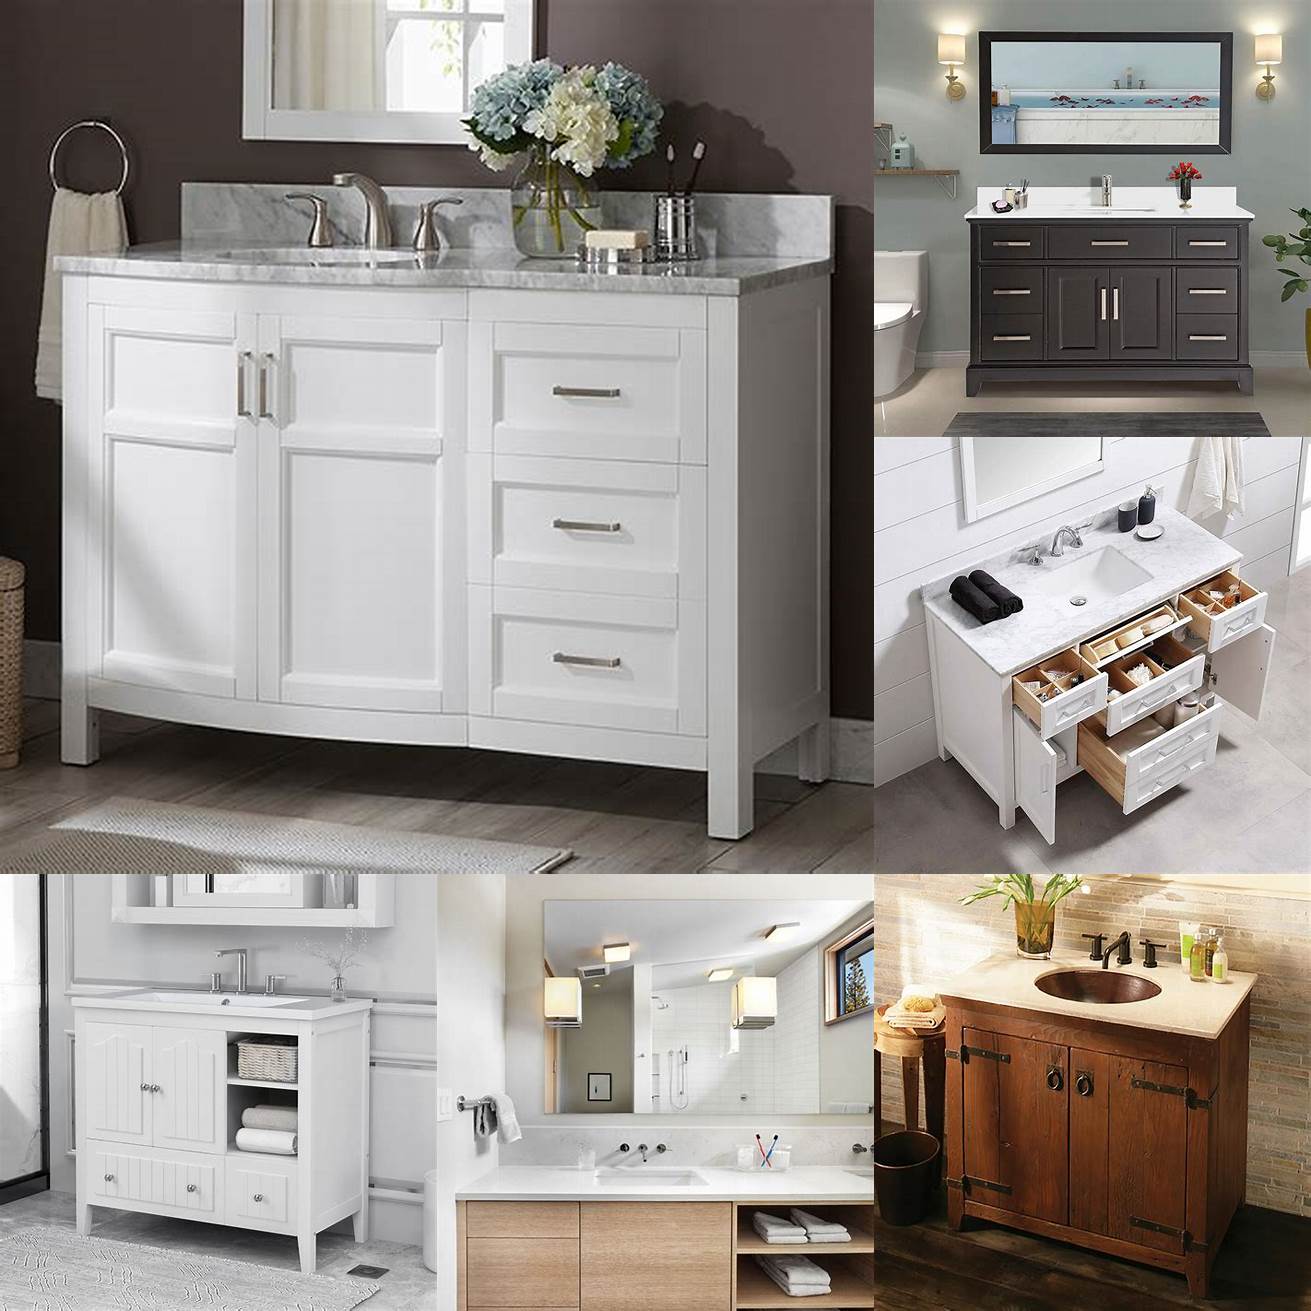 Storage Vanity base cabinets typically have one or more drawers andor doors for storing bathroom essentials